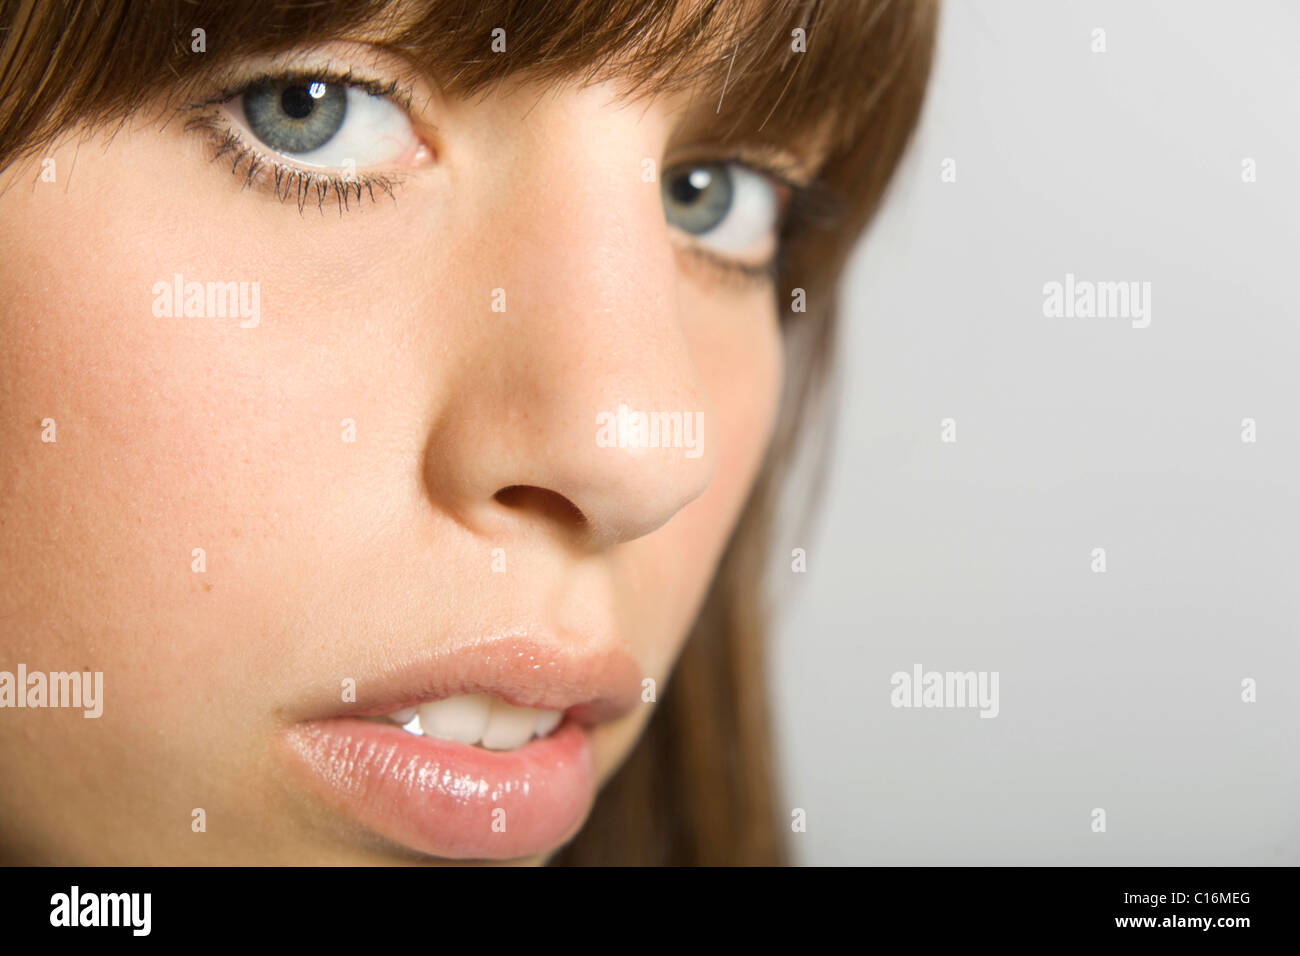 Close-up of the face of a young, dark-haired woman looking at the camera Stock Photo